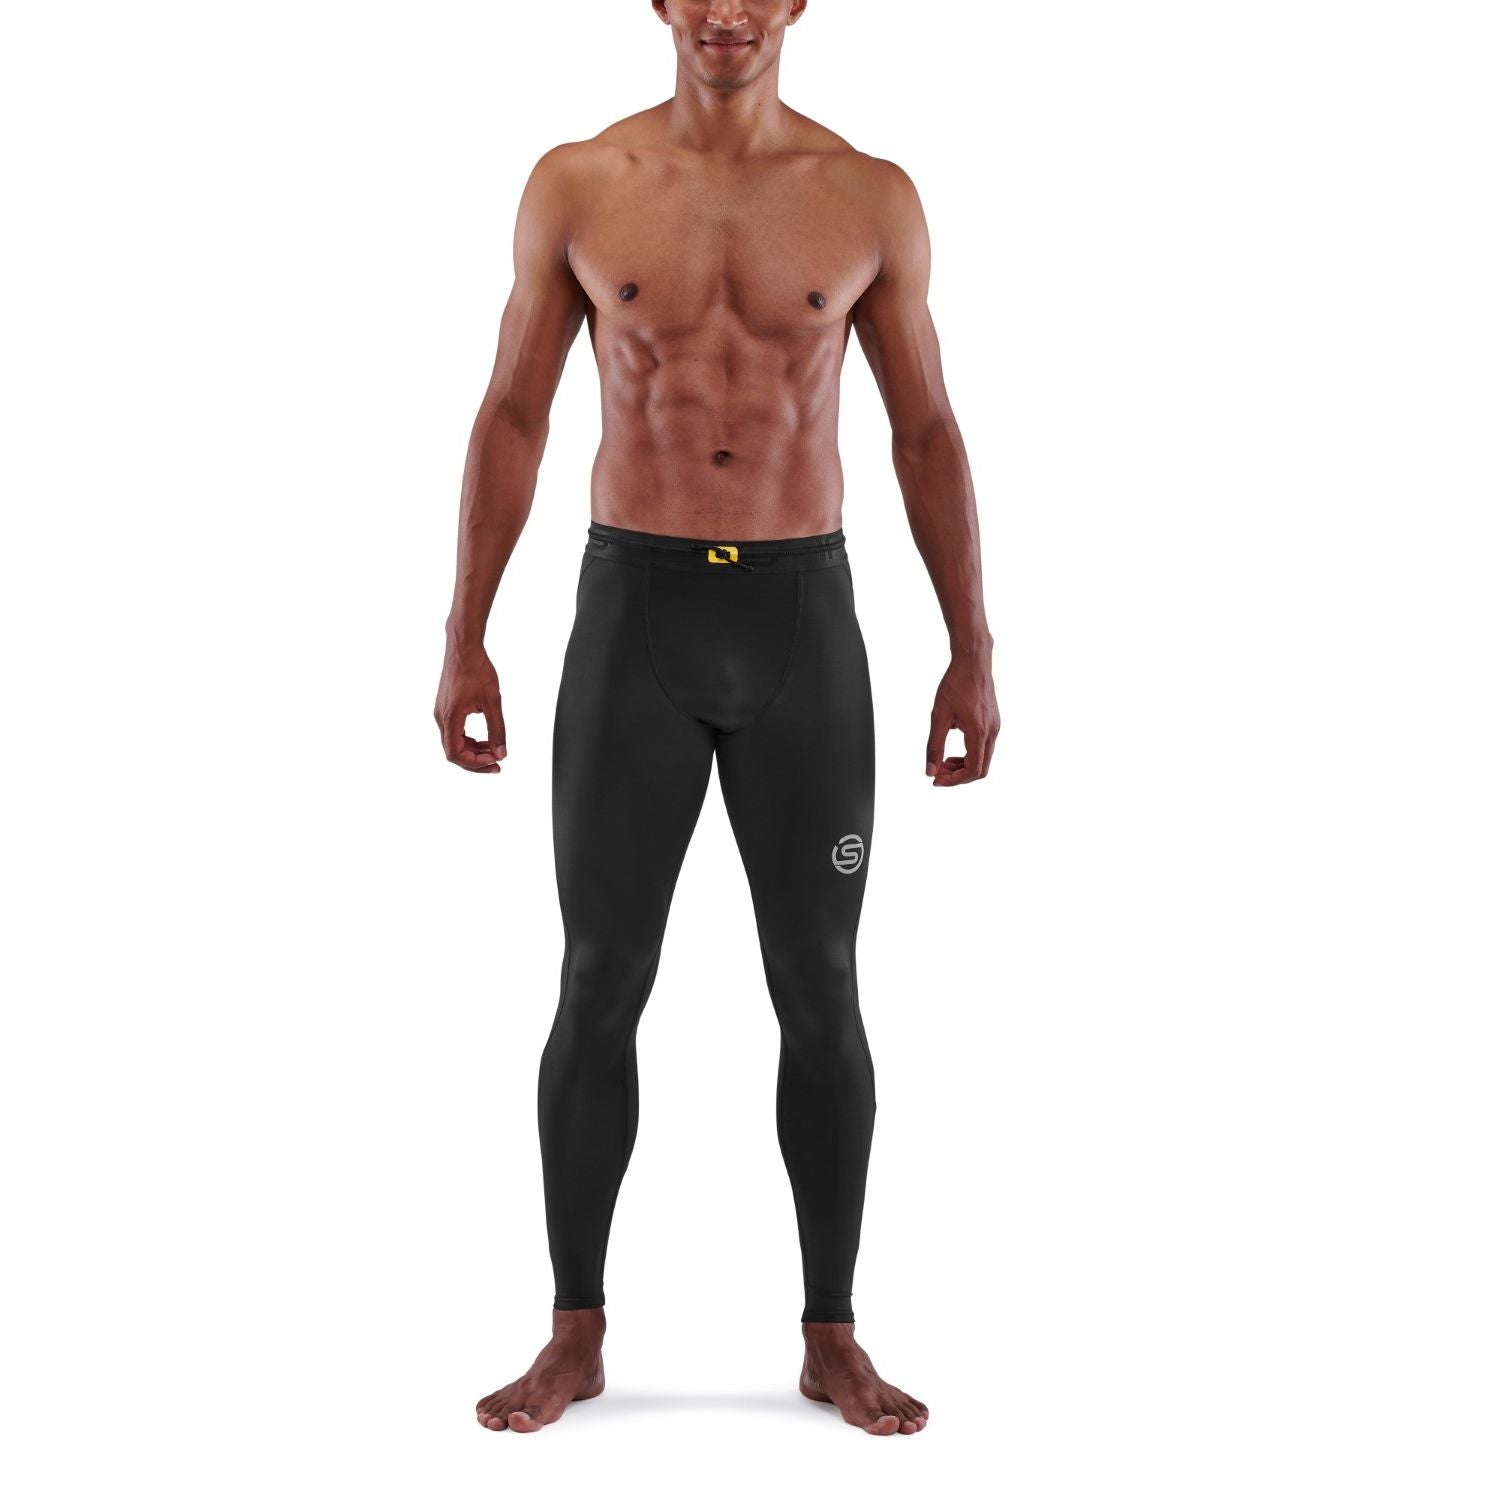 Men's SKINS Series 3 Travel and Recovery Compression Tights